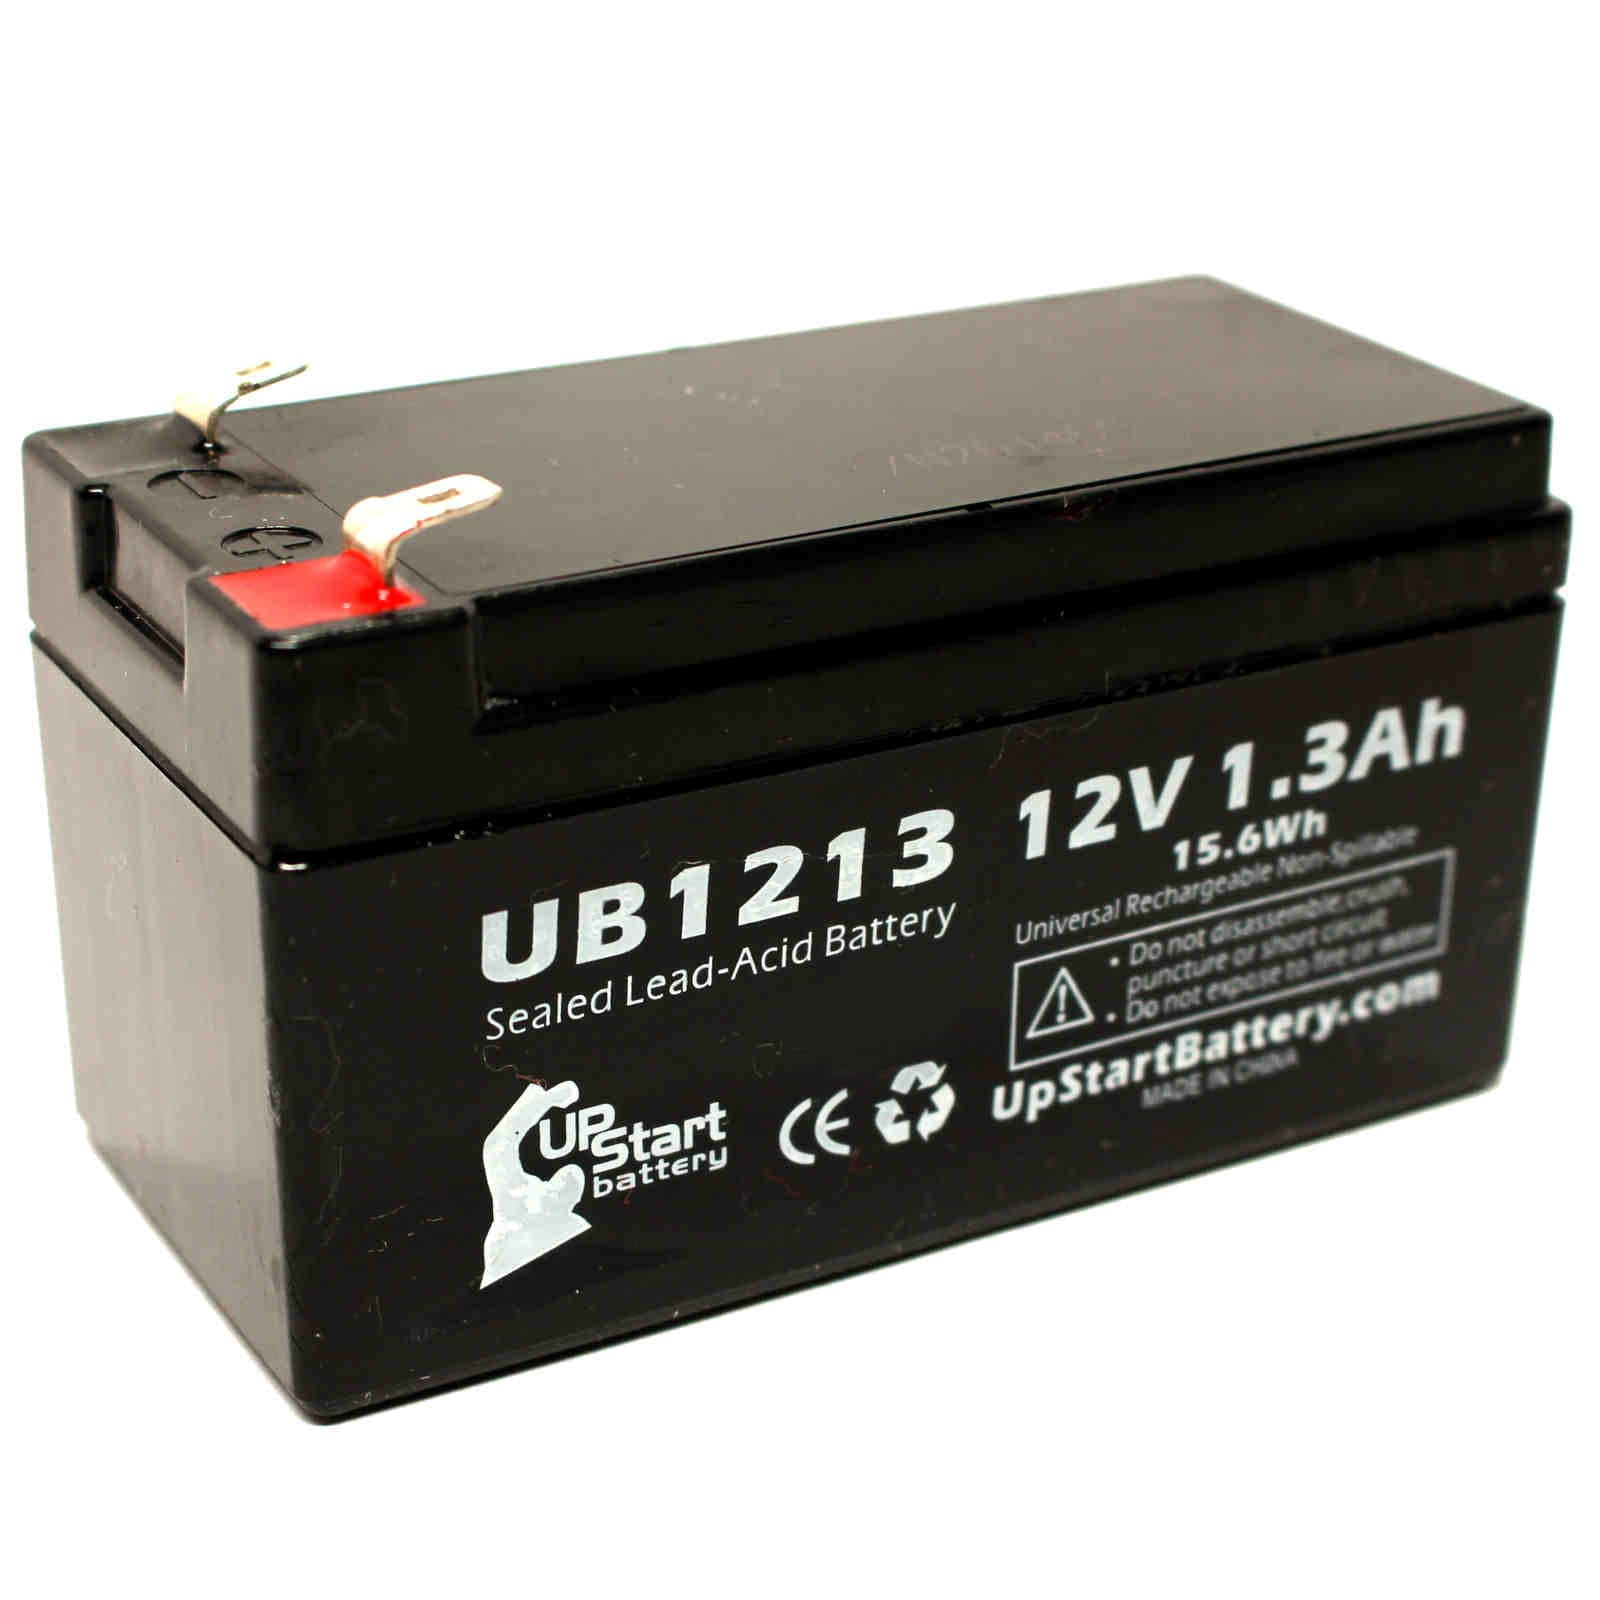 F battery. Bestway Sealed Rechargeable lead-acid Battery sp12-13a. MH 1213 аккумулятор 12v 3ah. Аккумулятор MH 1213 12v 1.3Ah. АКБ 12v lead rftstsl.